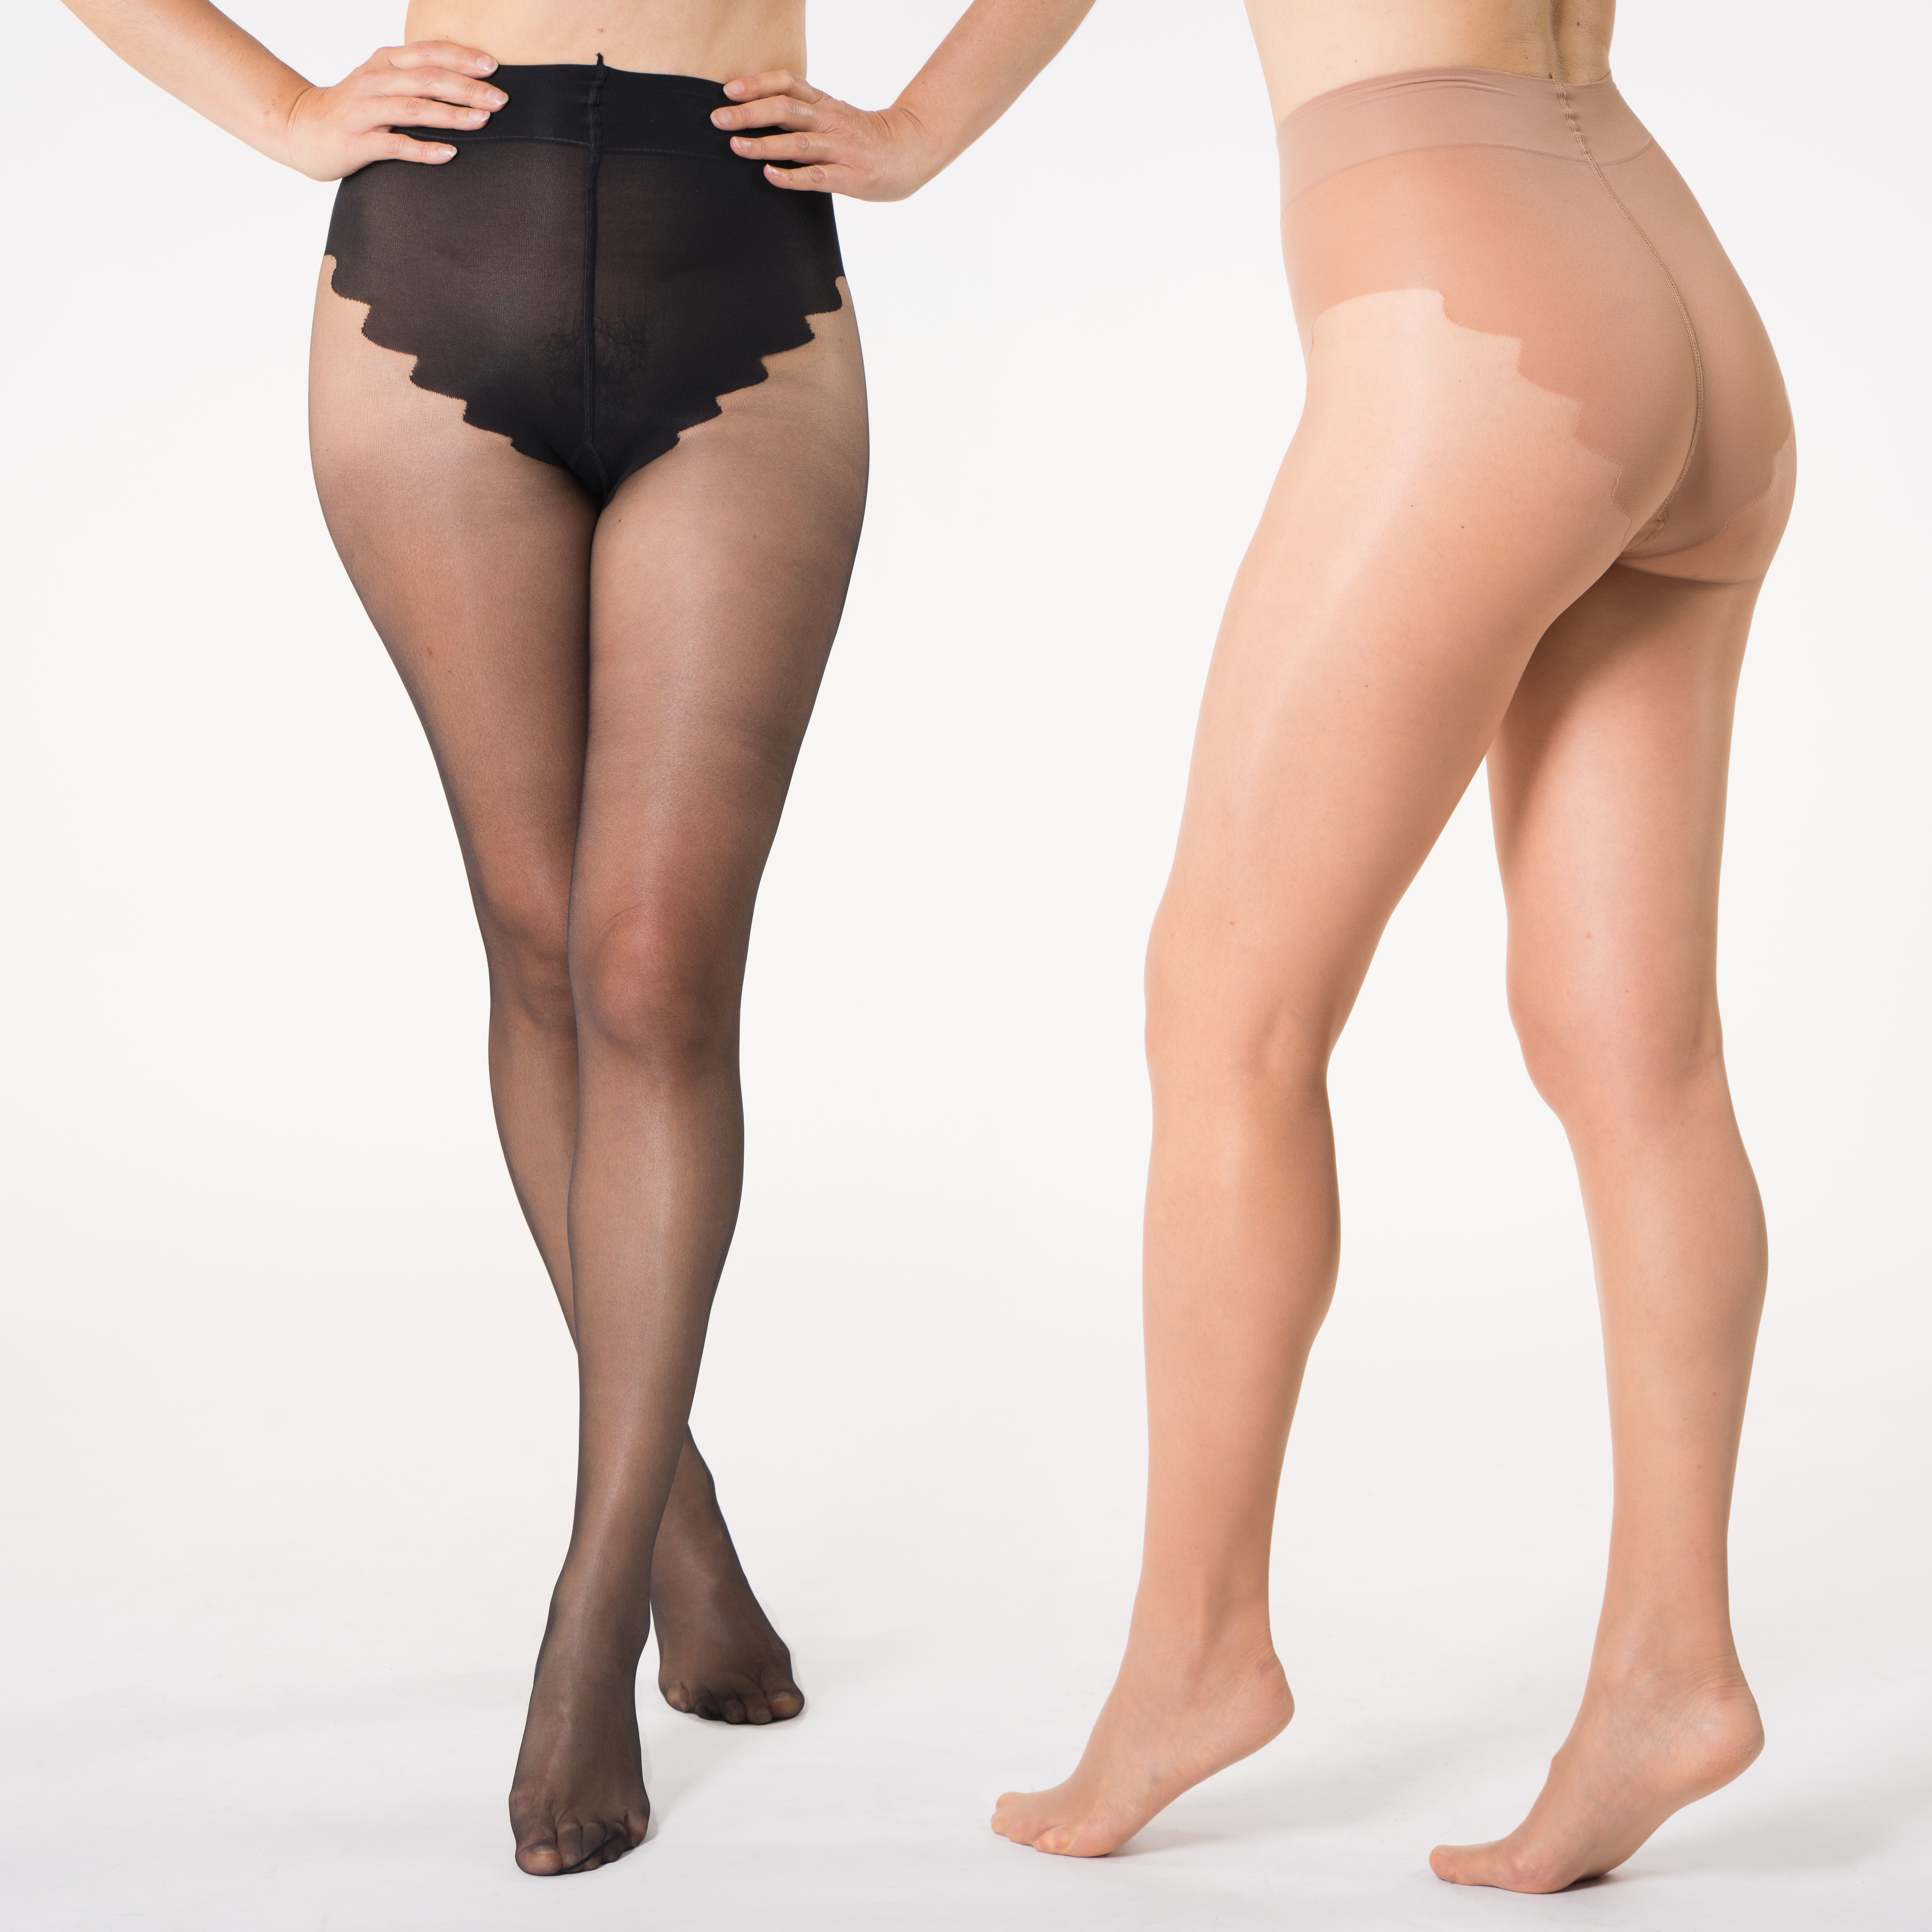 File:Sheer tights or pantyhose with high waist control top and thong back-  rear view 02.jpg - Wikimedia Commons